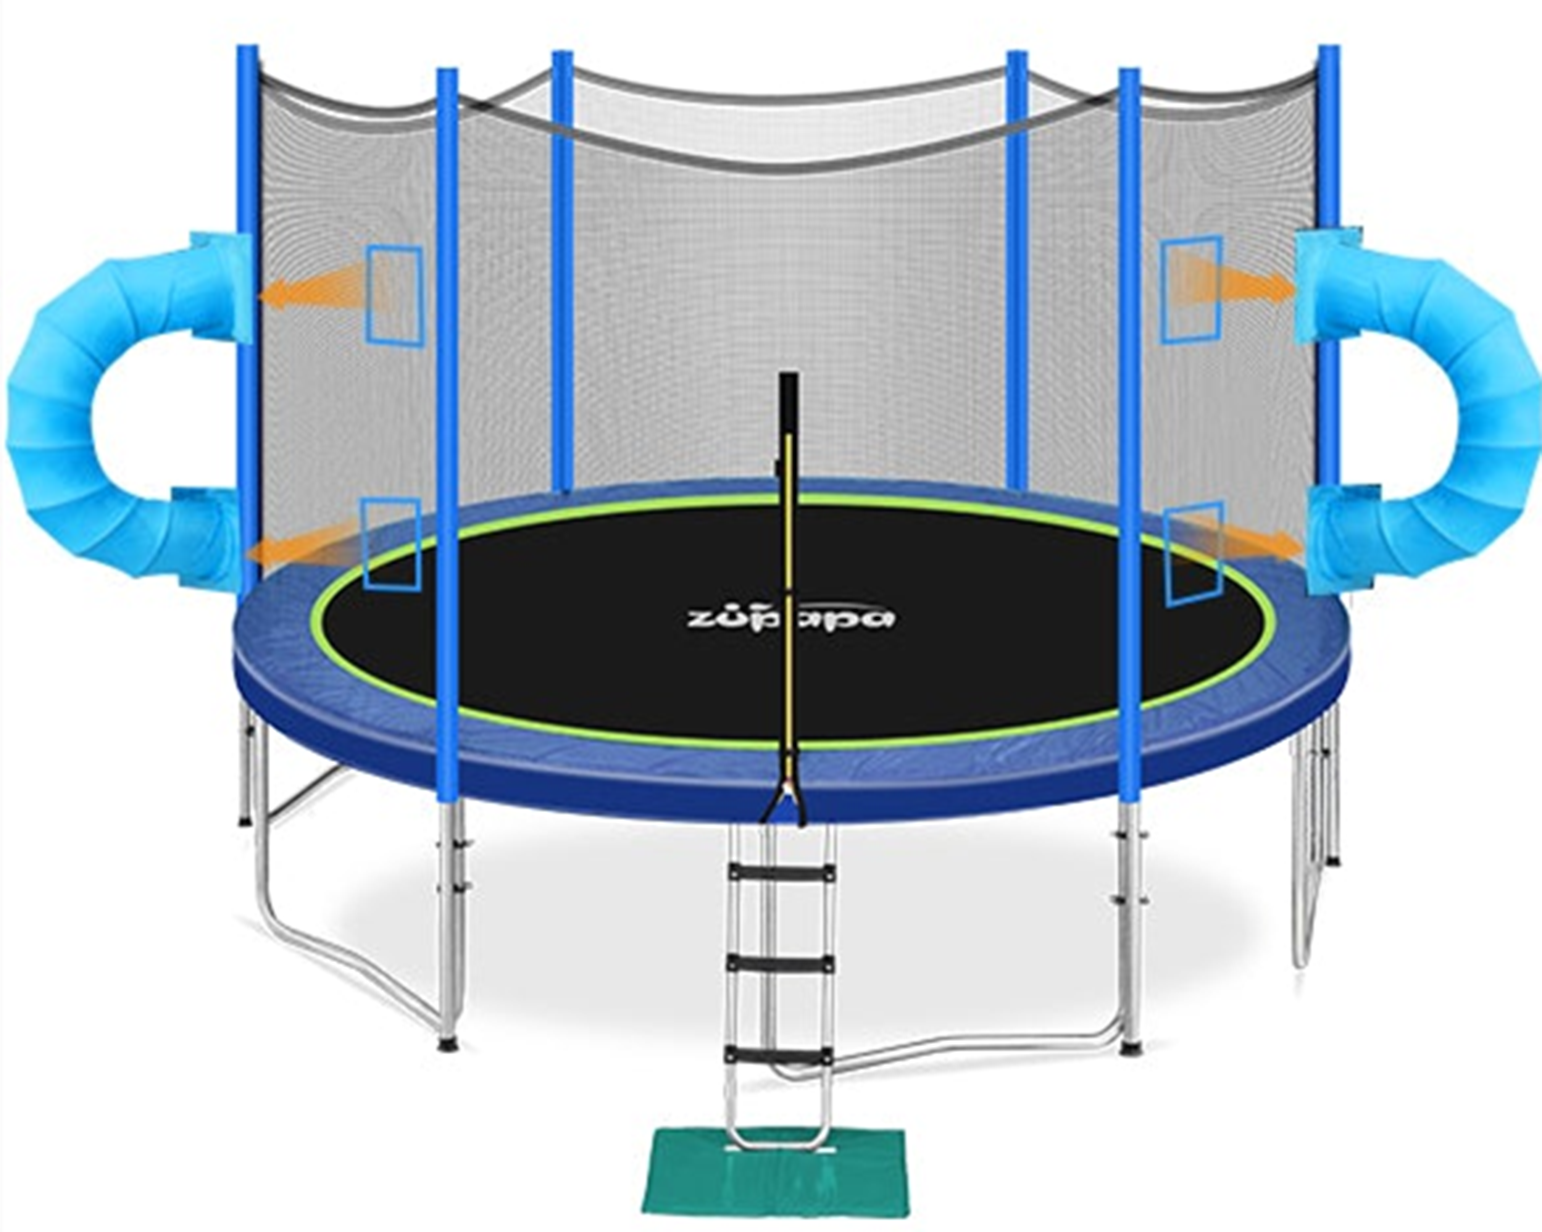 New Trampoline Basketball without Hoop - Outdoor Trampoline for